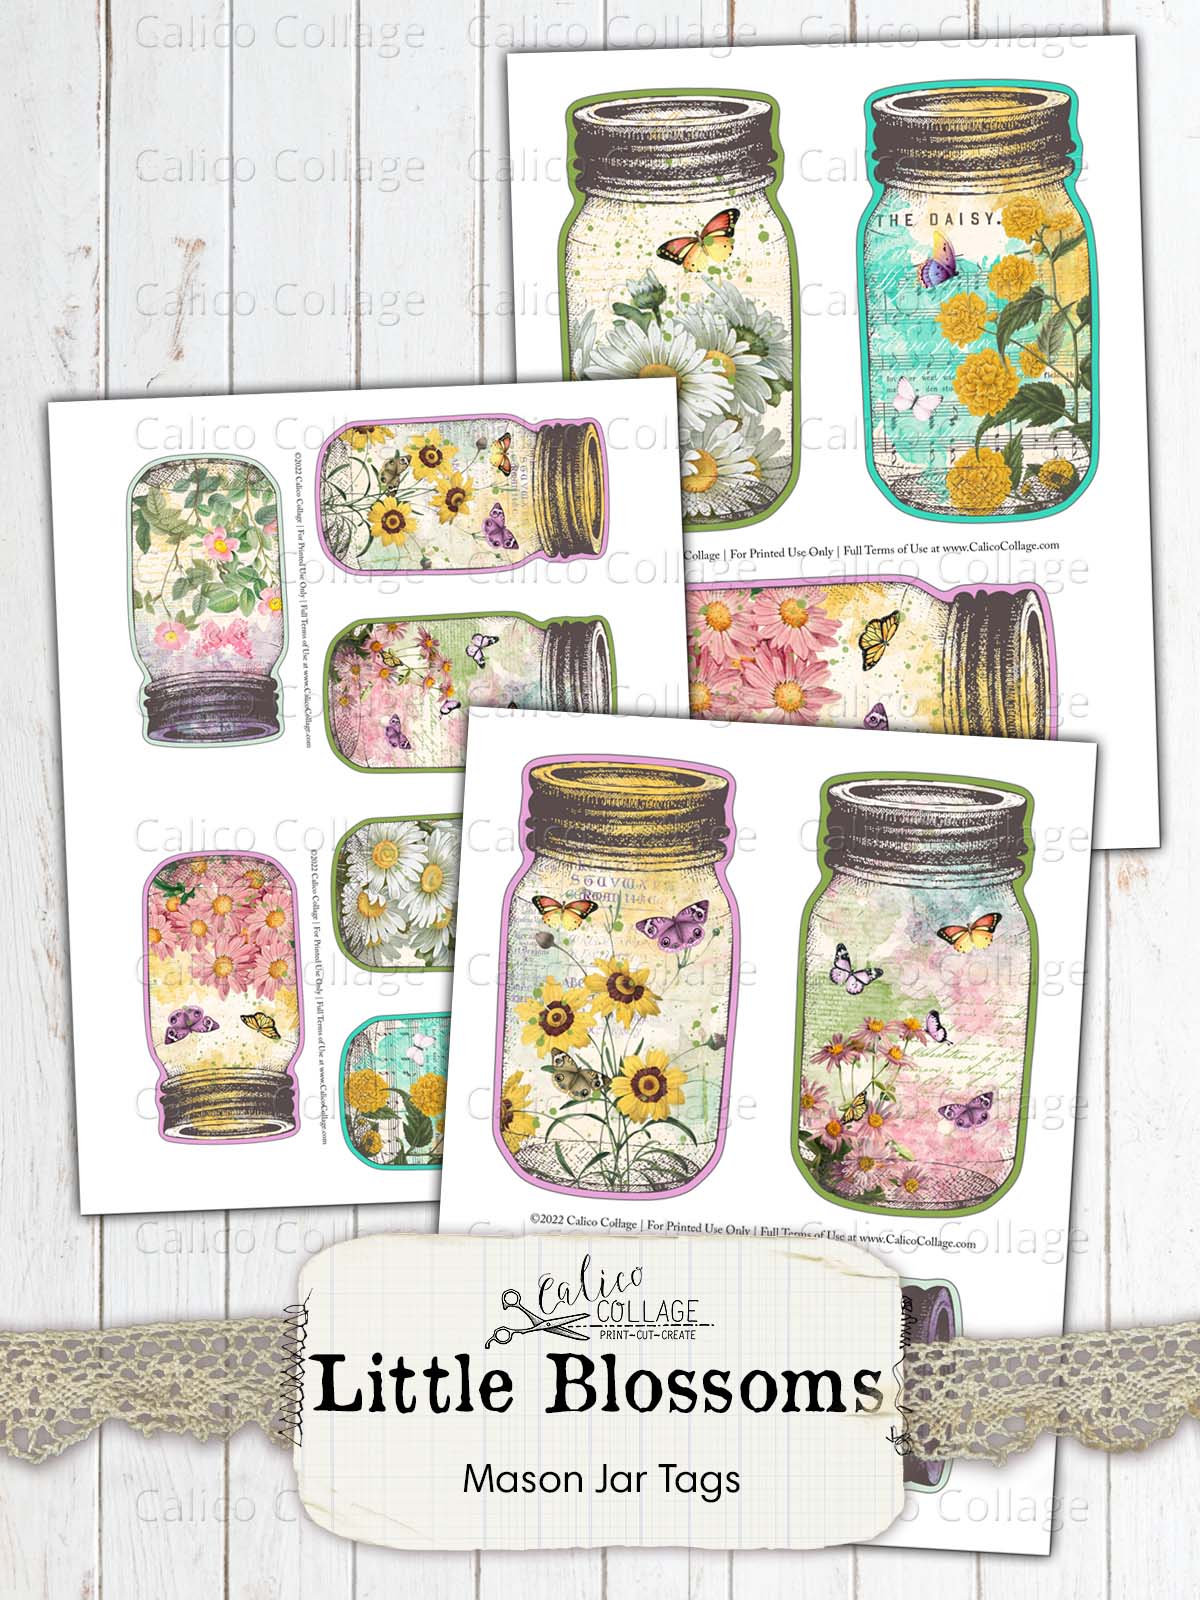 Shabby Chic Florals Scrapbook Embellishments. Junk Journal/Scrapbook Papers  Kit, with Tags, Clipart, Mason Jars and Pockets. Smash Journal 8.5 x 11